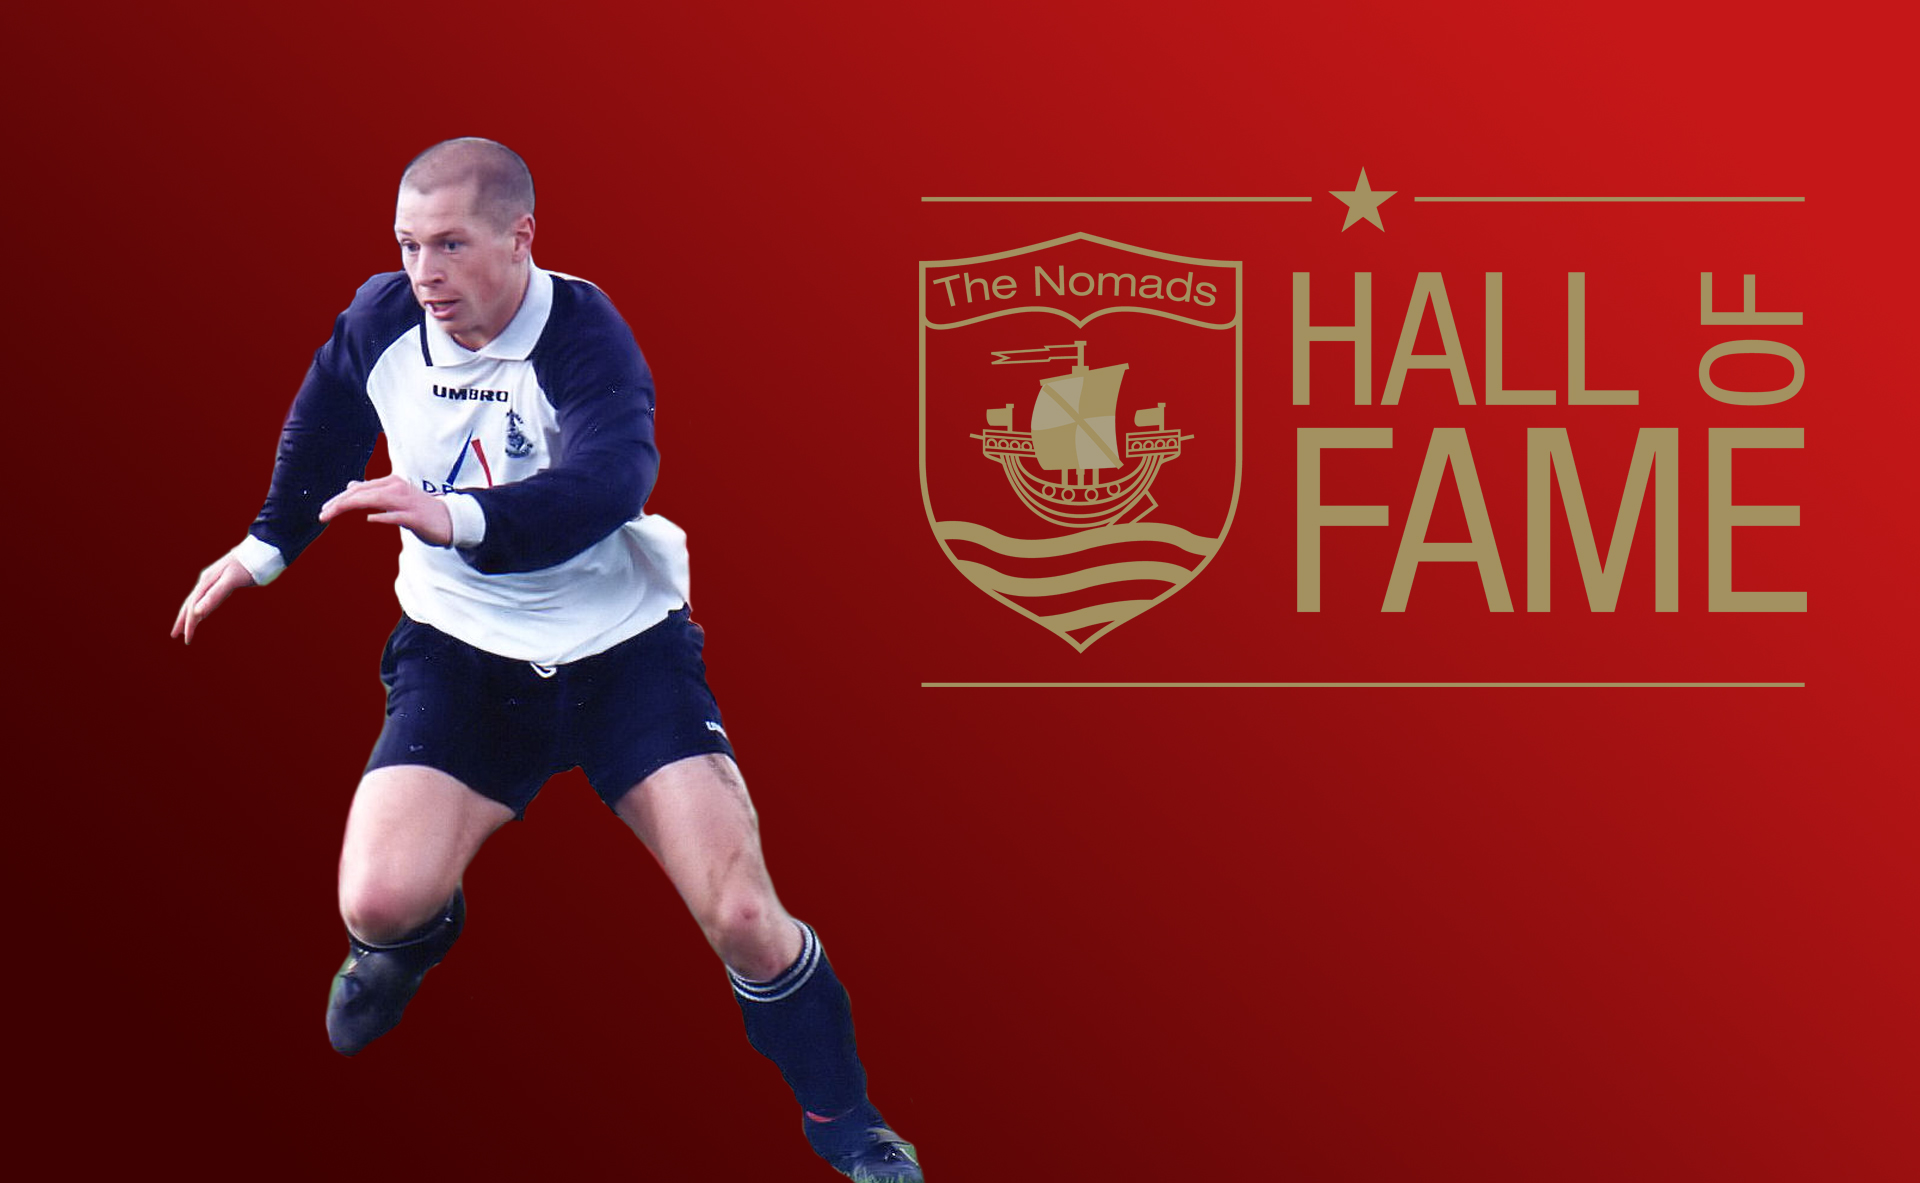 Craig Hutchinson has been named as the second inductee in The Nomads' Hall of Fame